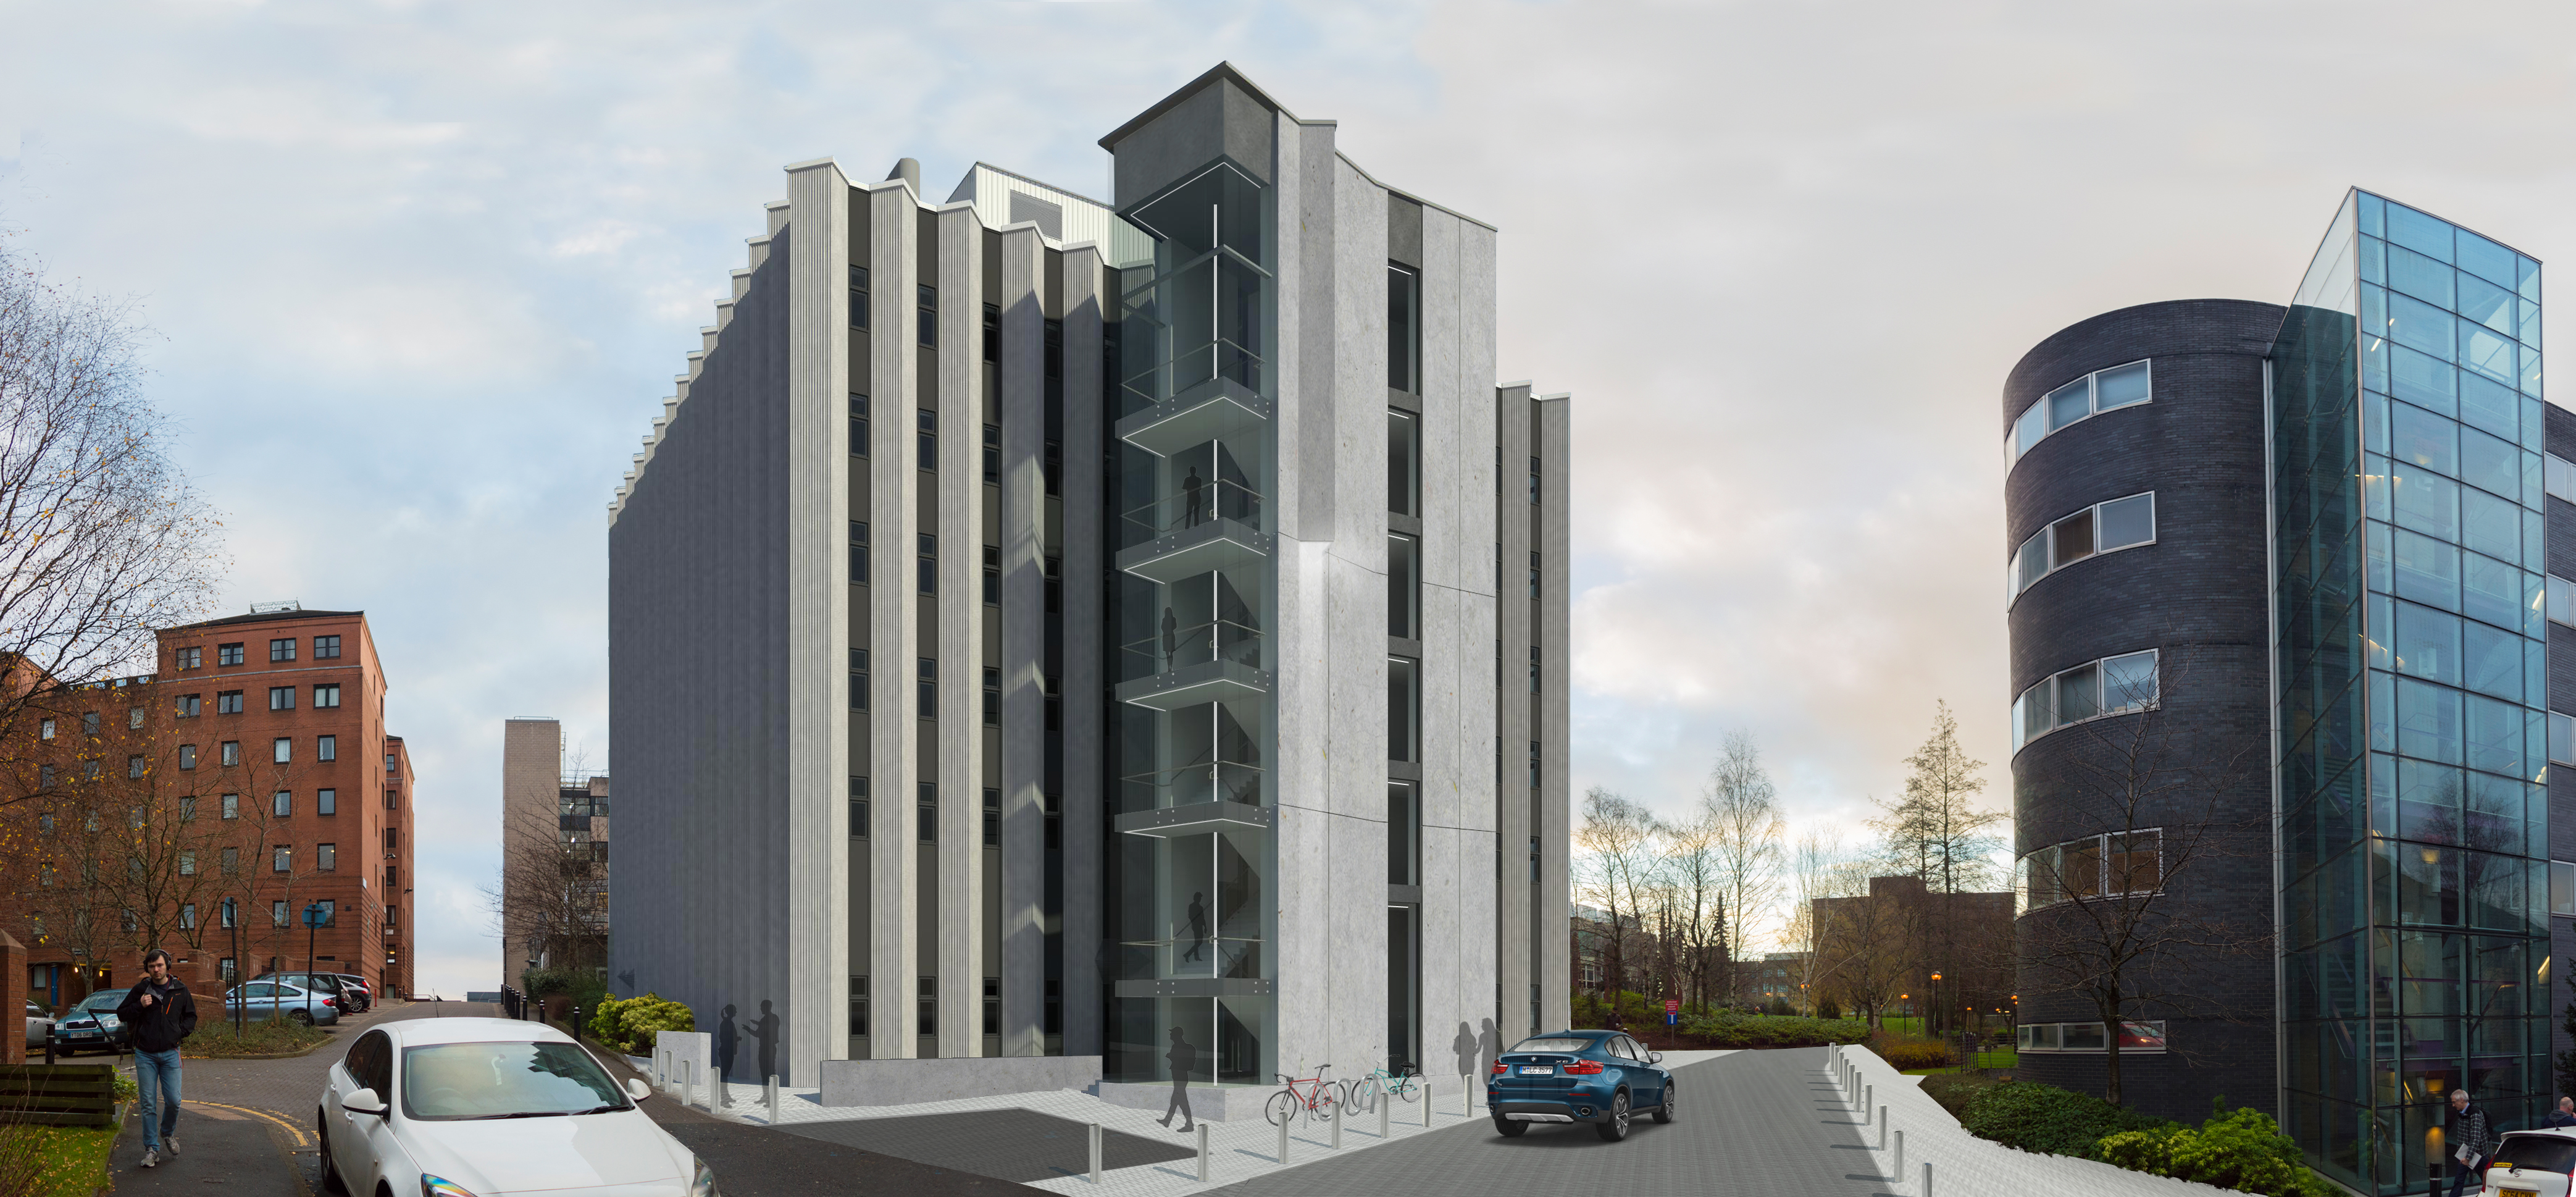 Kier wins £9.7m redevelopment of Wolfson Building for University of Strathclyde